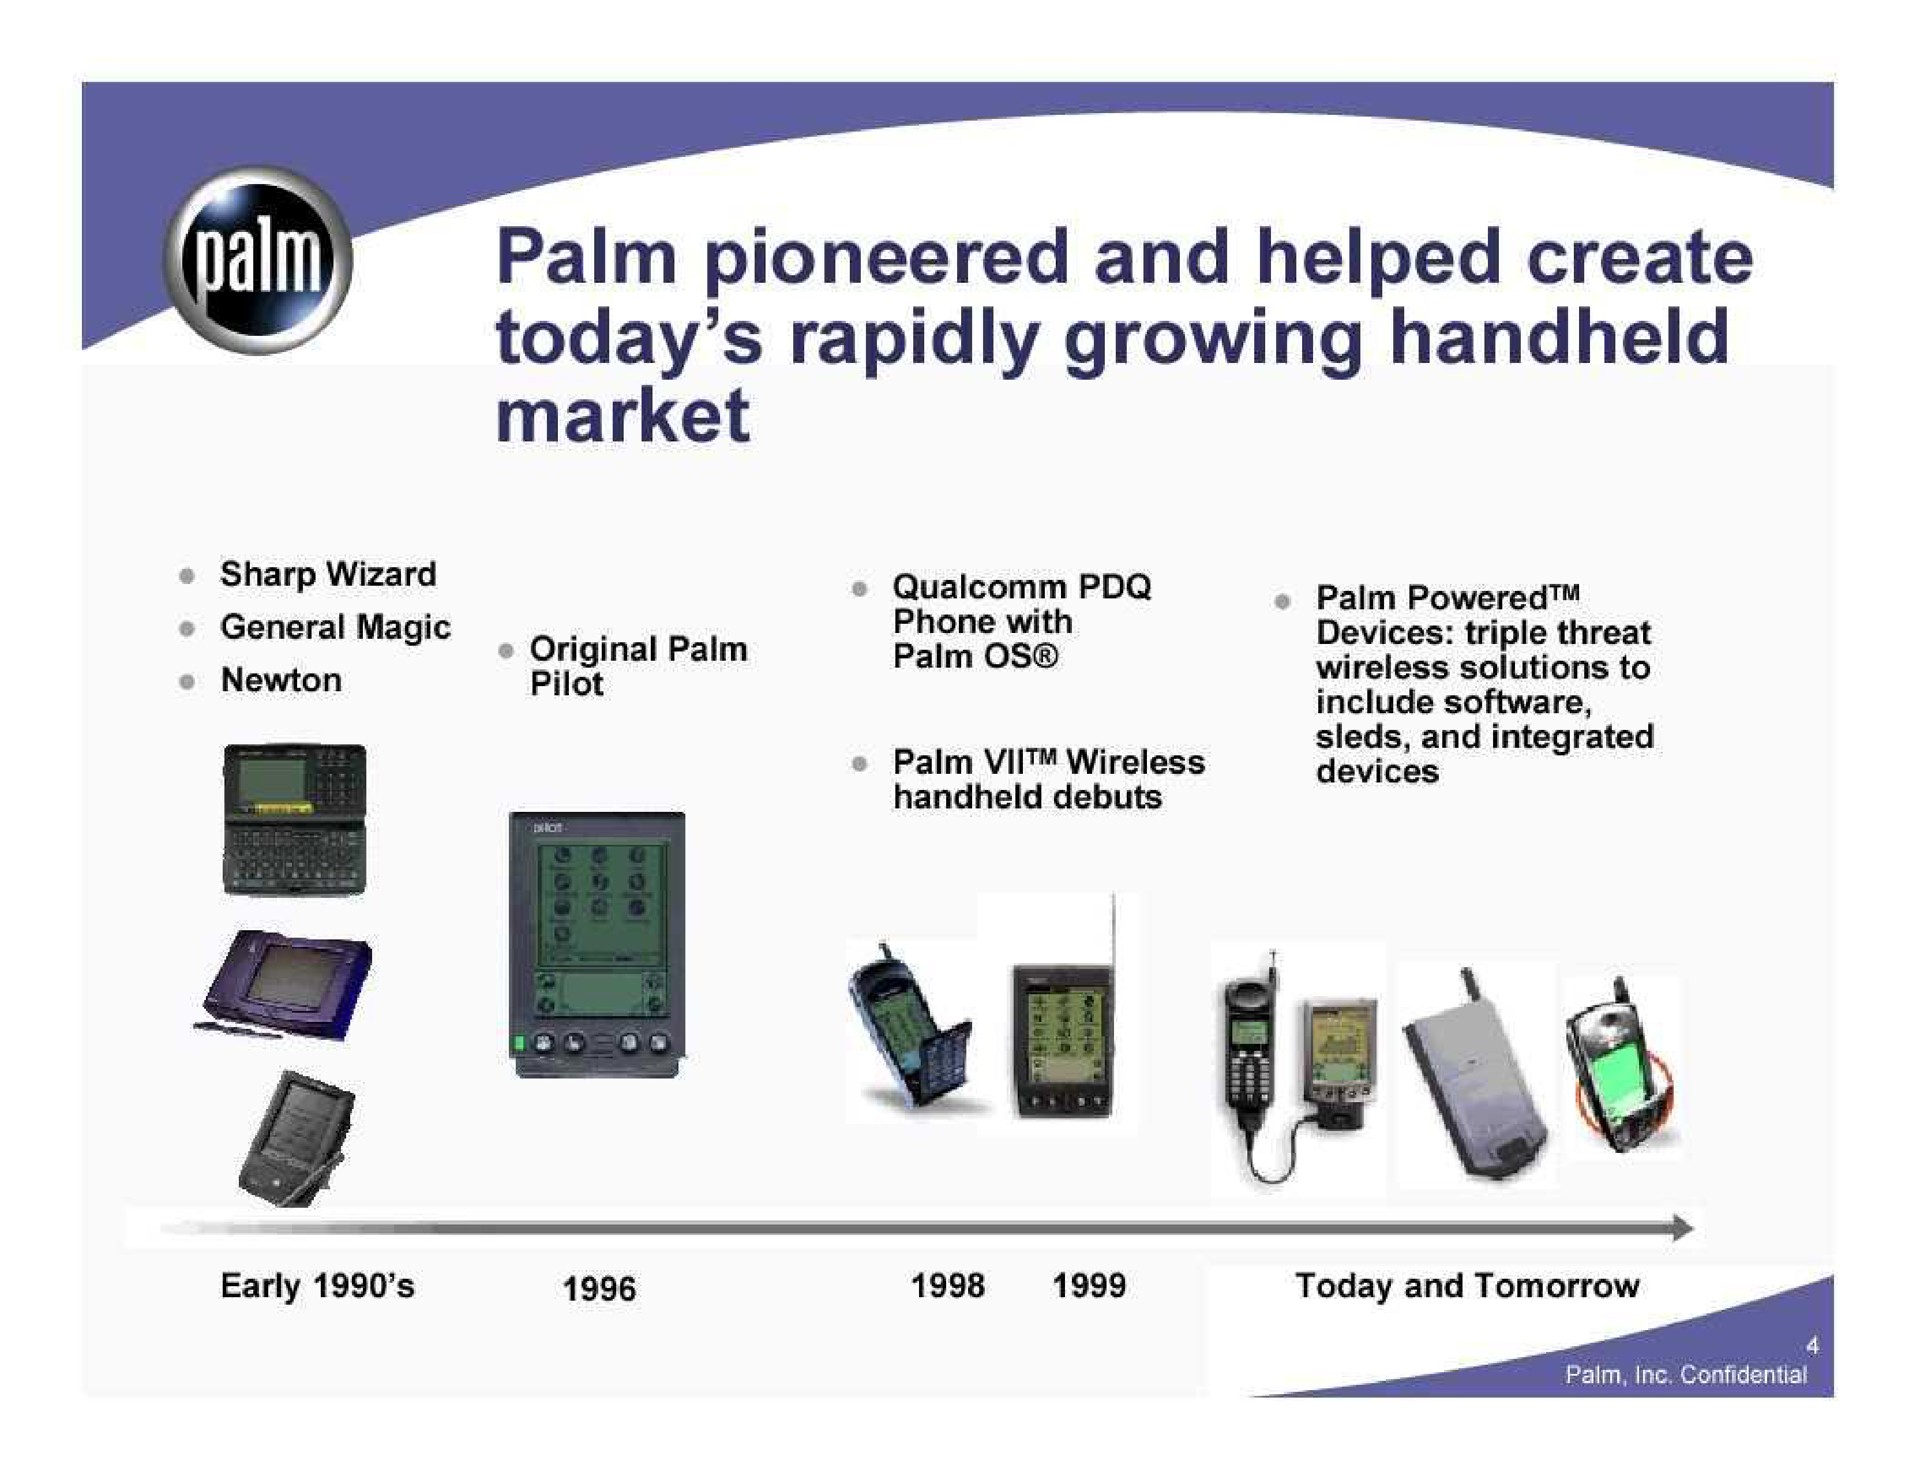 palm pioneered and helped create today rapidly growing | Palm Inc.